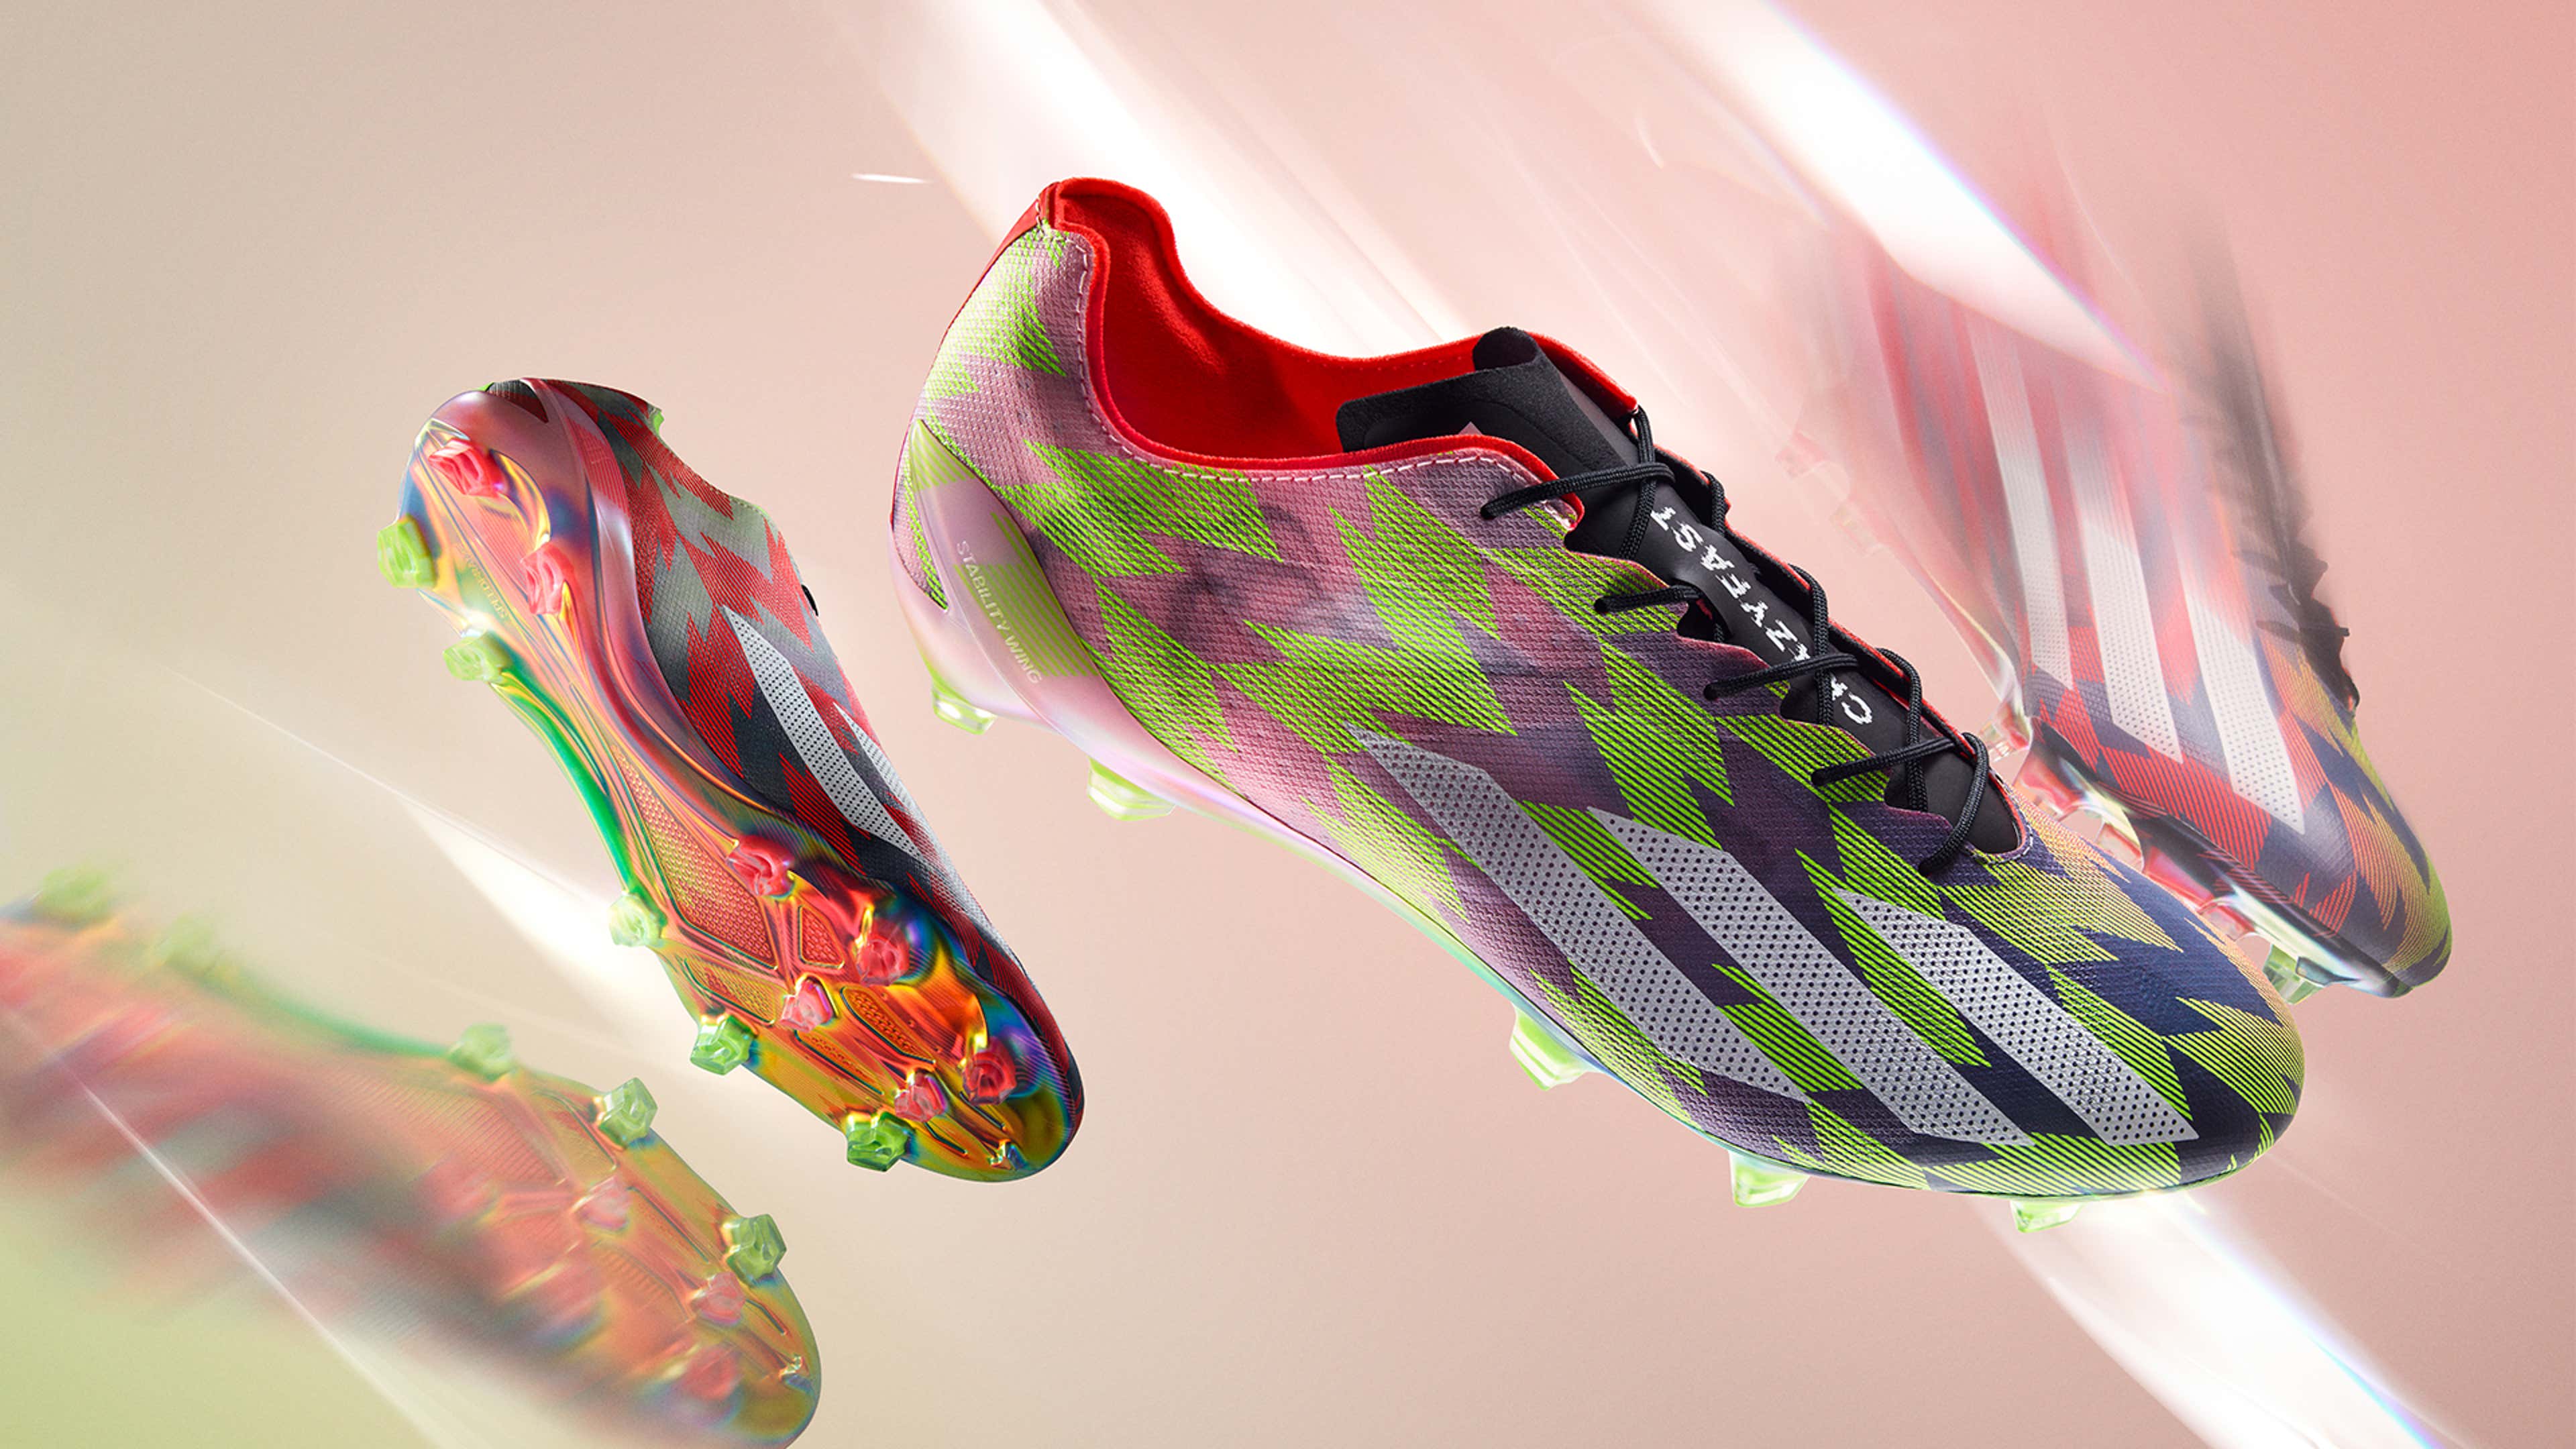 adidas launches the X boot ahead of the Champions League Final | Goal.com US